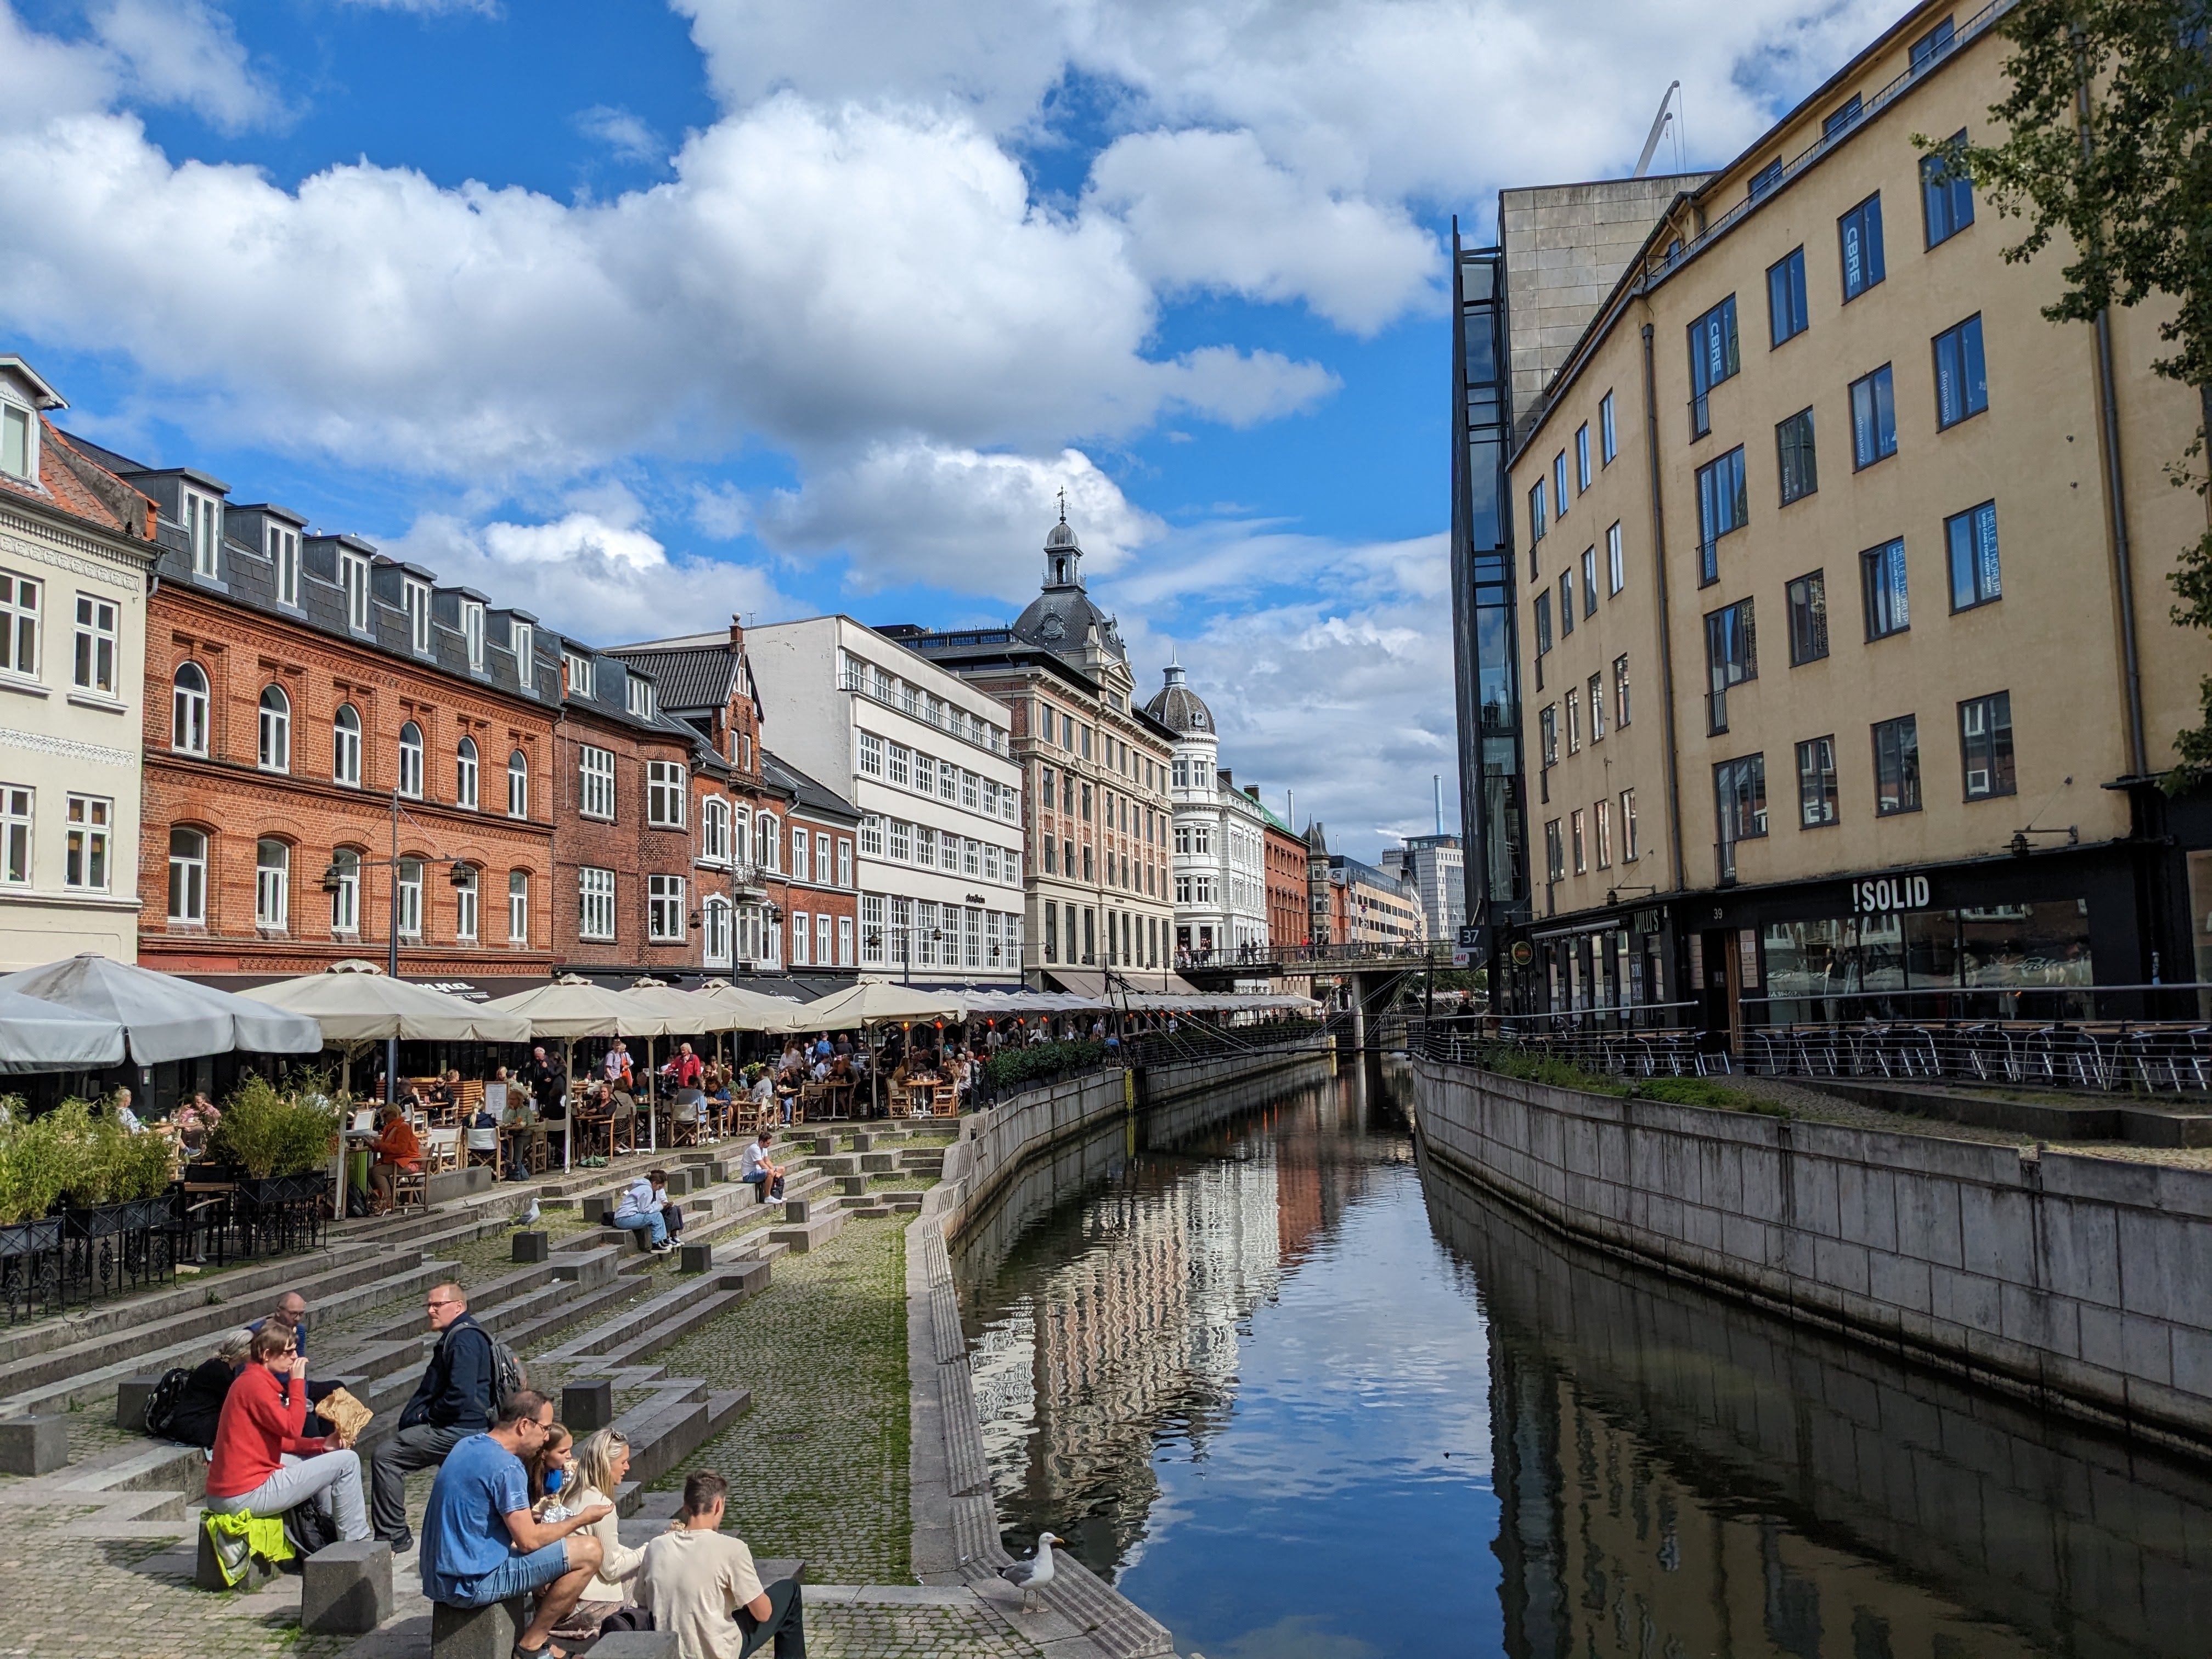 One of Aarhus' canals in its downtown core